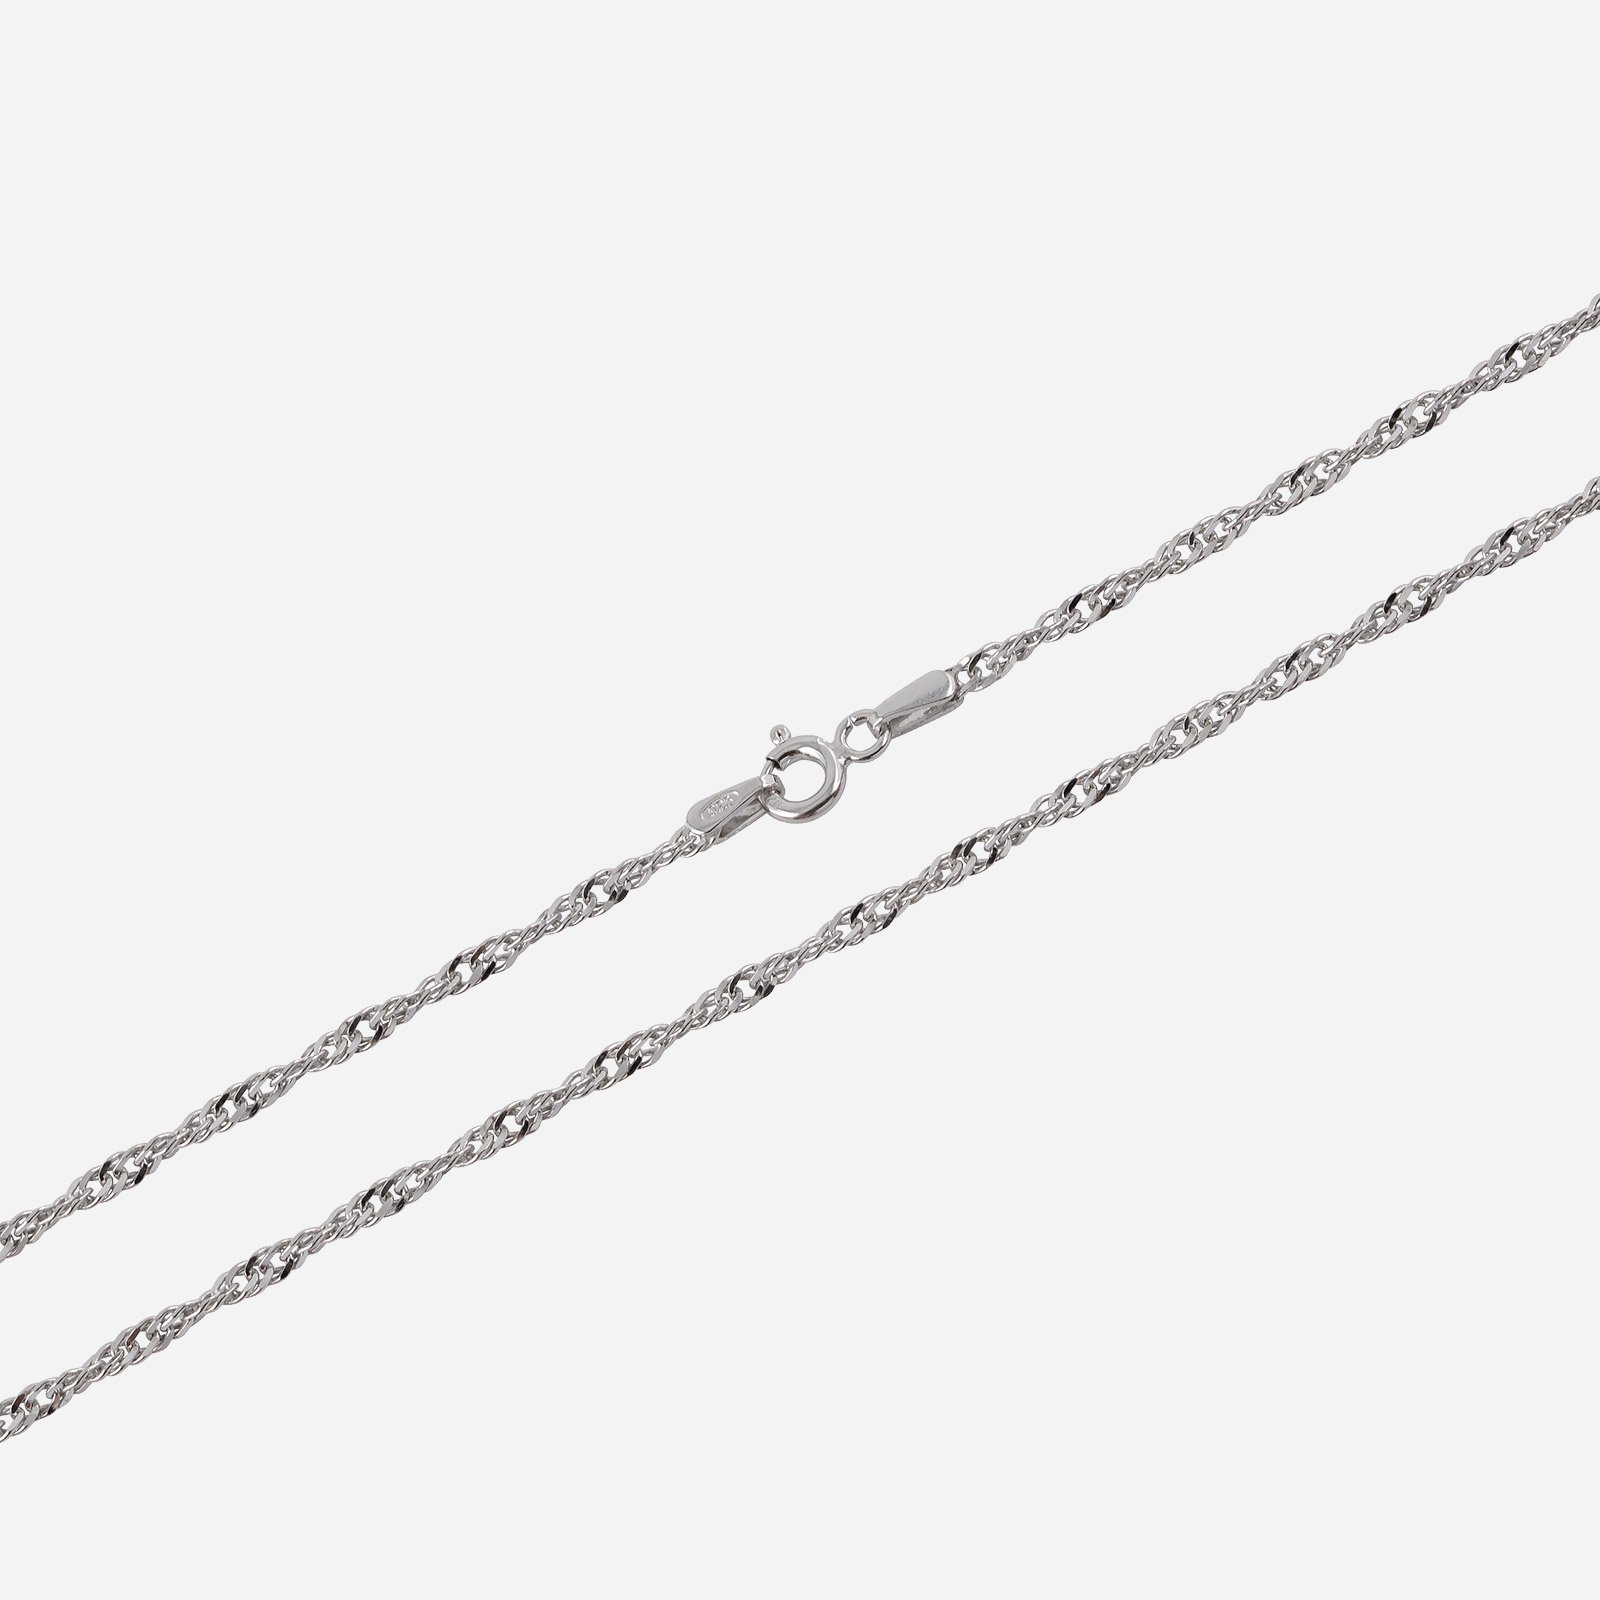 SILVER 925 Silverhalsband Singapore – 0,95 mm bred